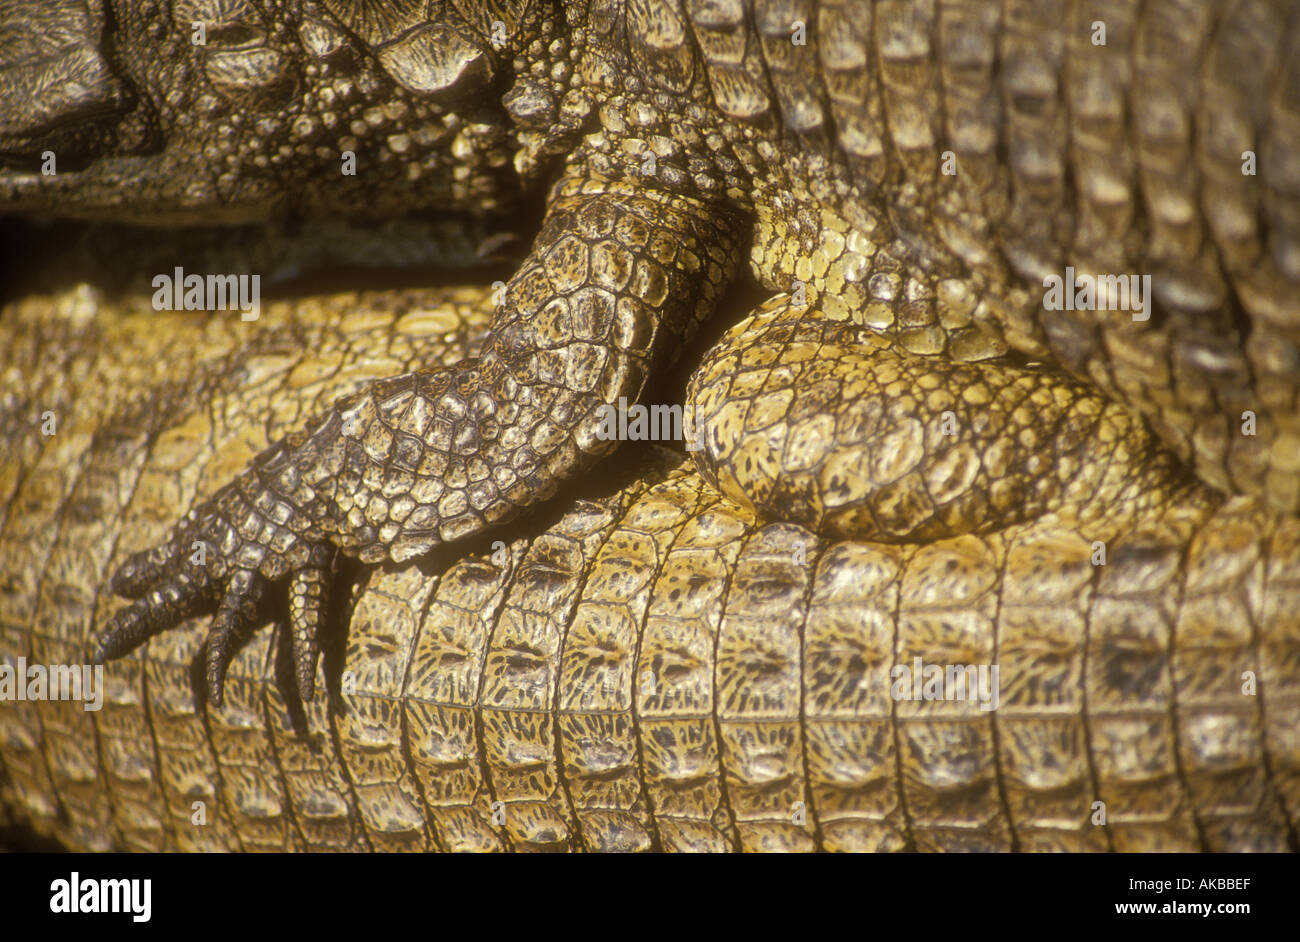 Crocodile foot and skin showing scales Zimbabwe Crocodile skin is used to make artefacts such as handbags Stock Photo